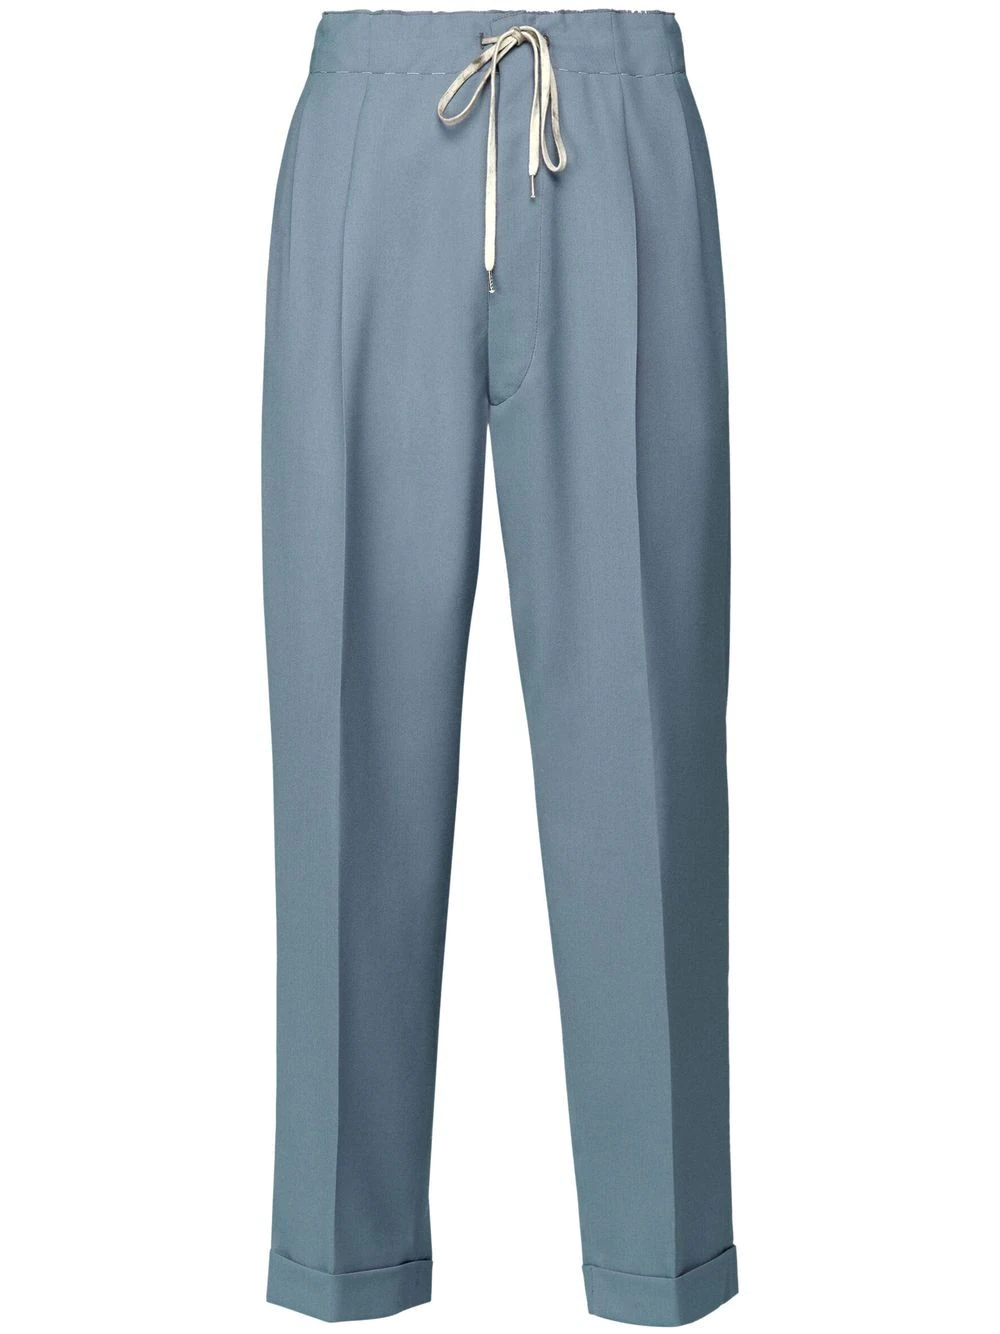 MAISON MARGIELA TAPERED TROUSERS WITH DRAWSTRING